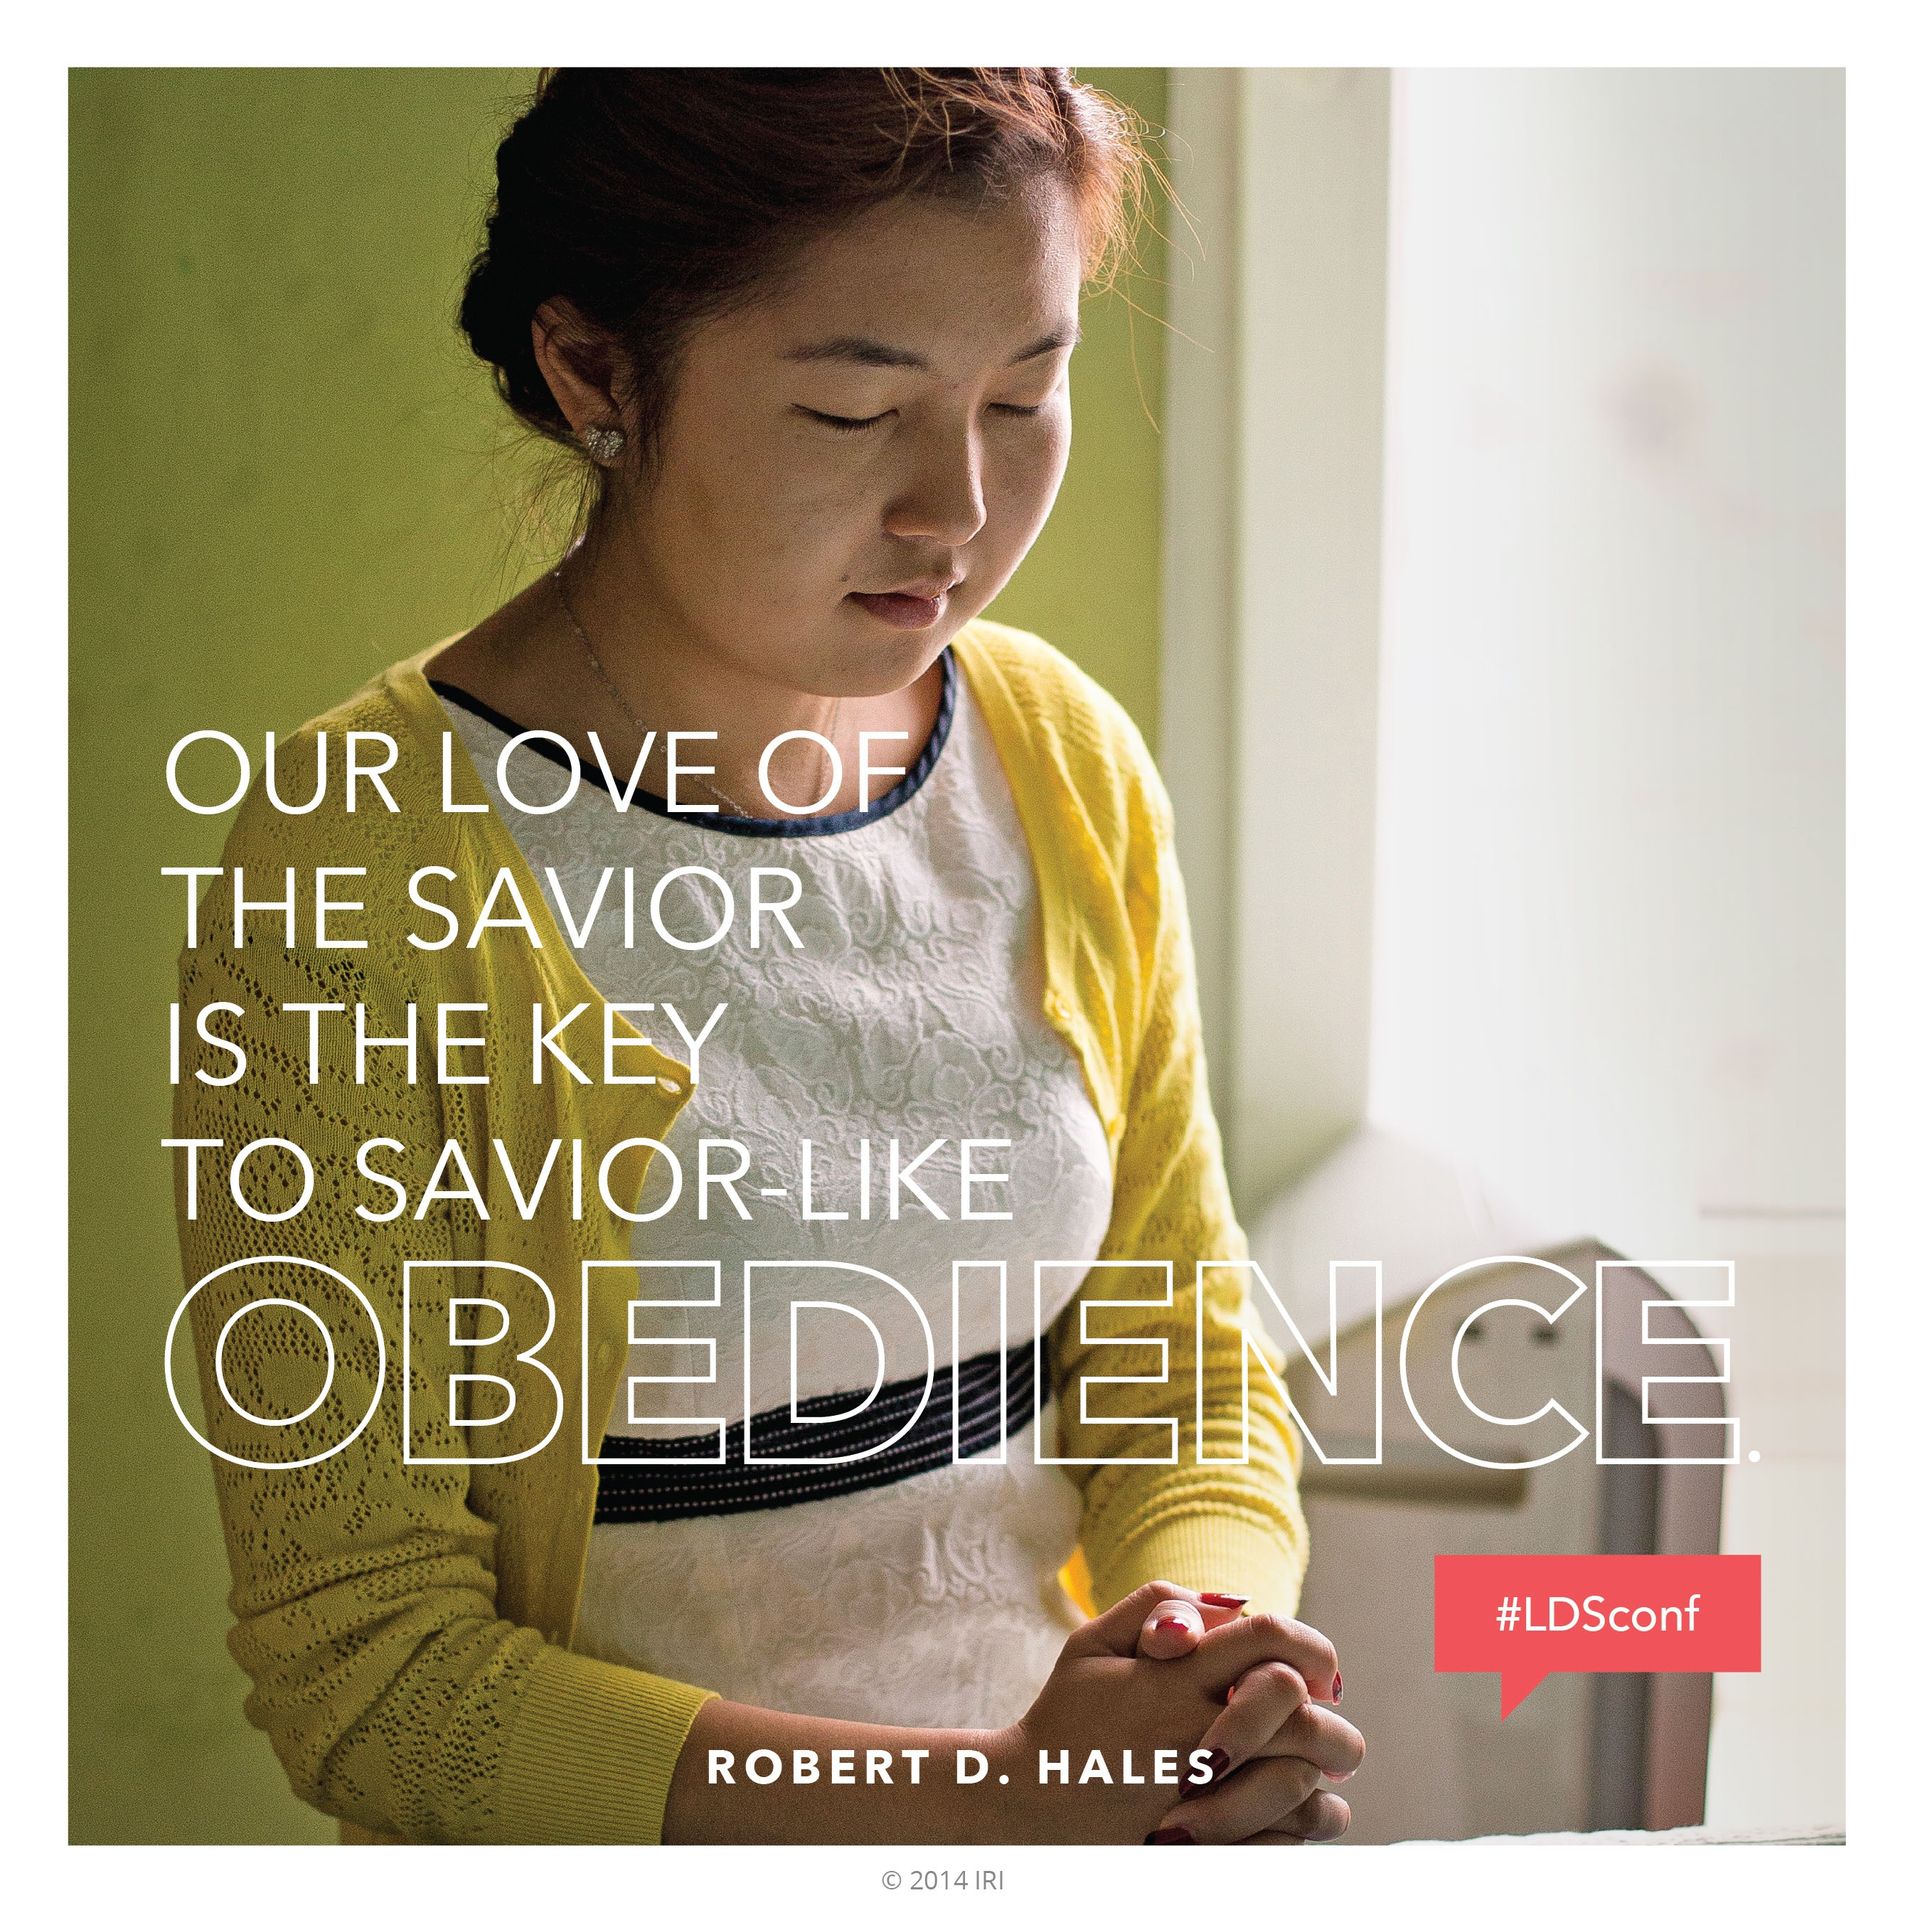 “Our love of the Savior is the key to Savior-like obedience.”—Elder Robert D. Hales, “If Ye Love Me, Keep My Commandments” © undefined ipCode 1.